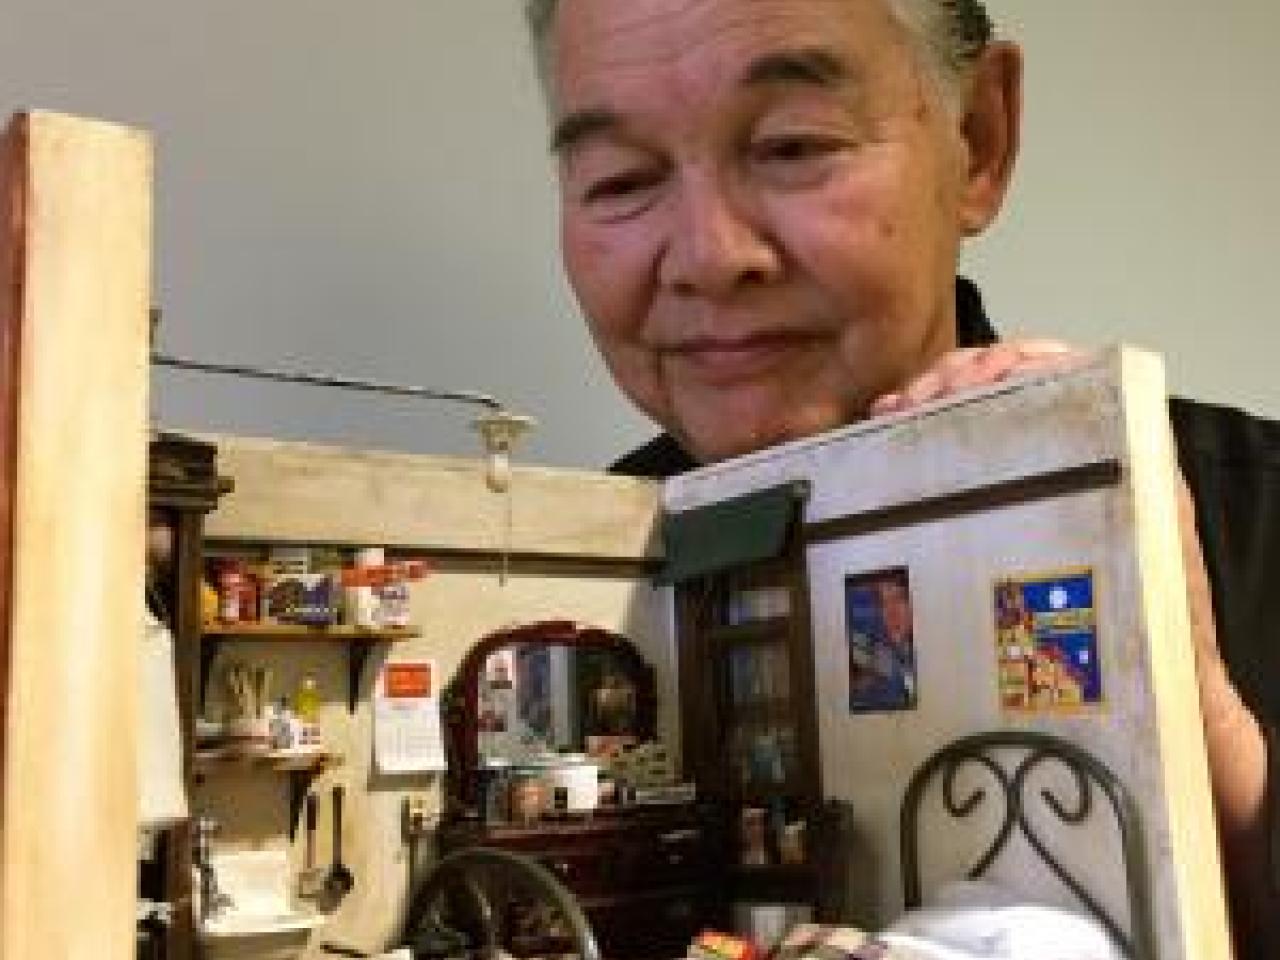 Frank Wong, an elder Chinese-American man, smiles as he peers into an intricately decorated miniature bedroom he made, complete with bed, vanity with mirror, art on the walls, and a sink.